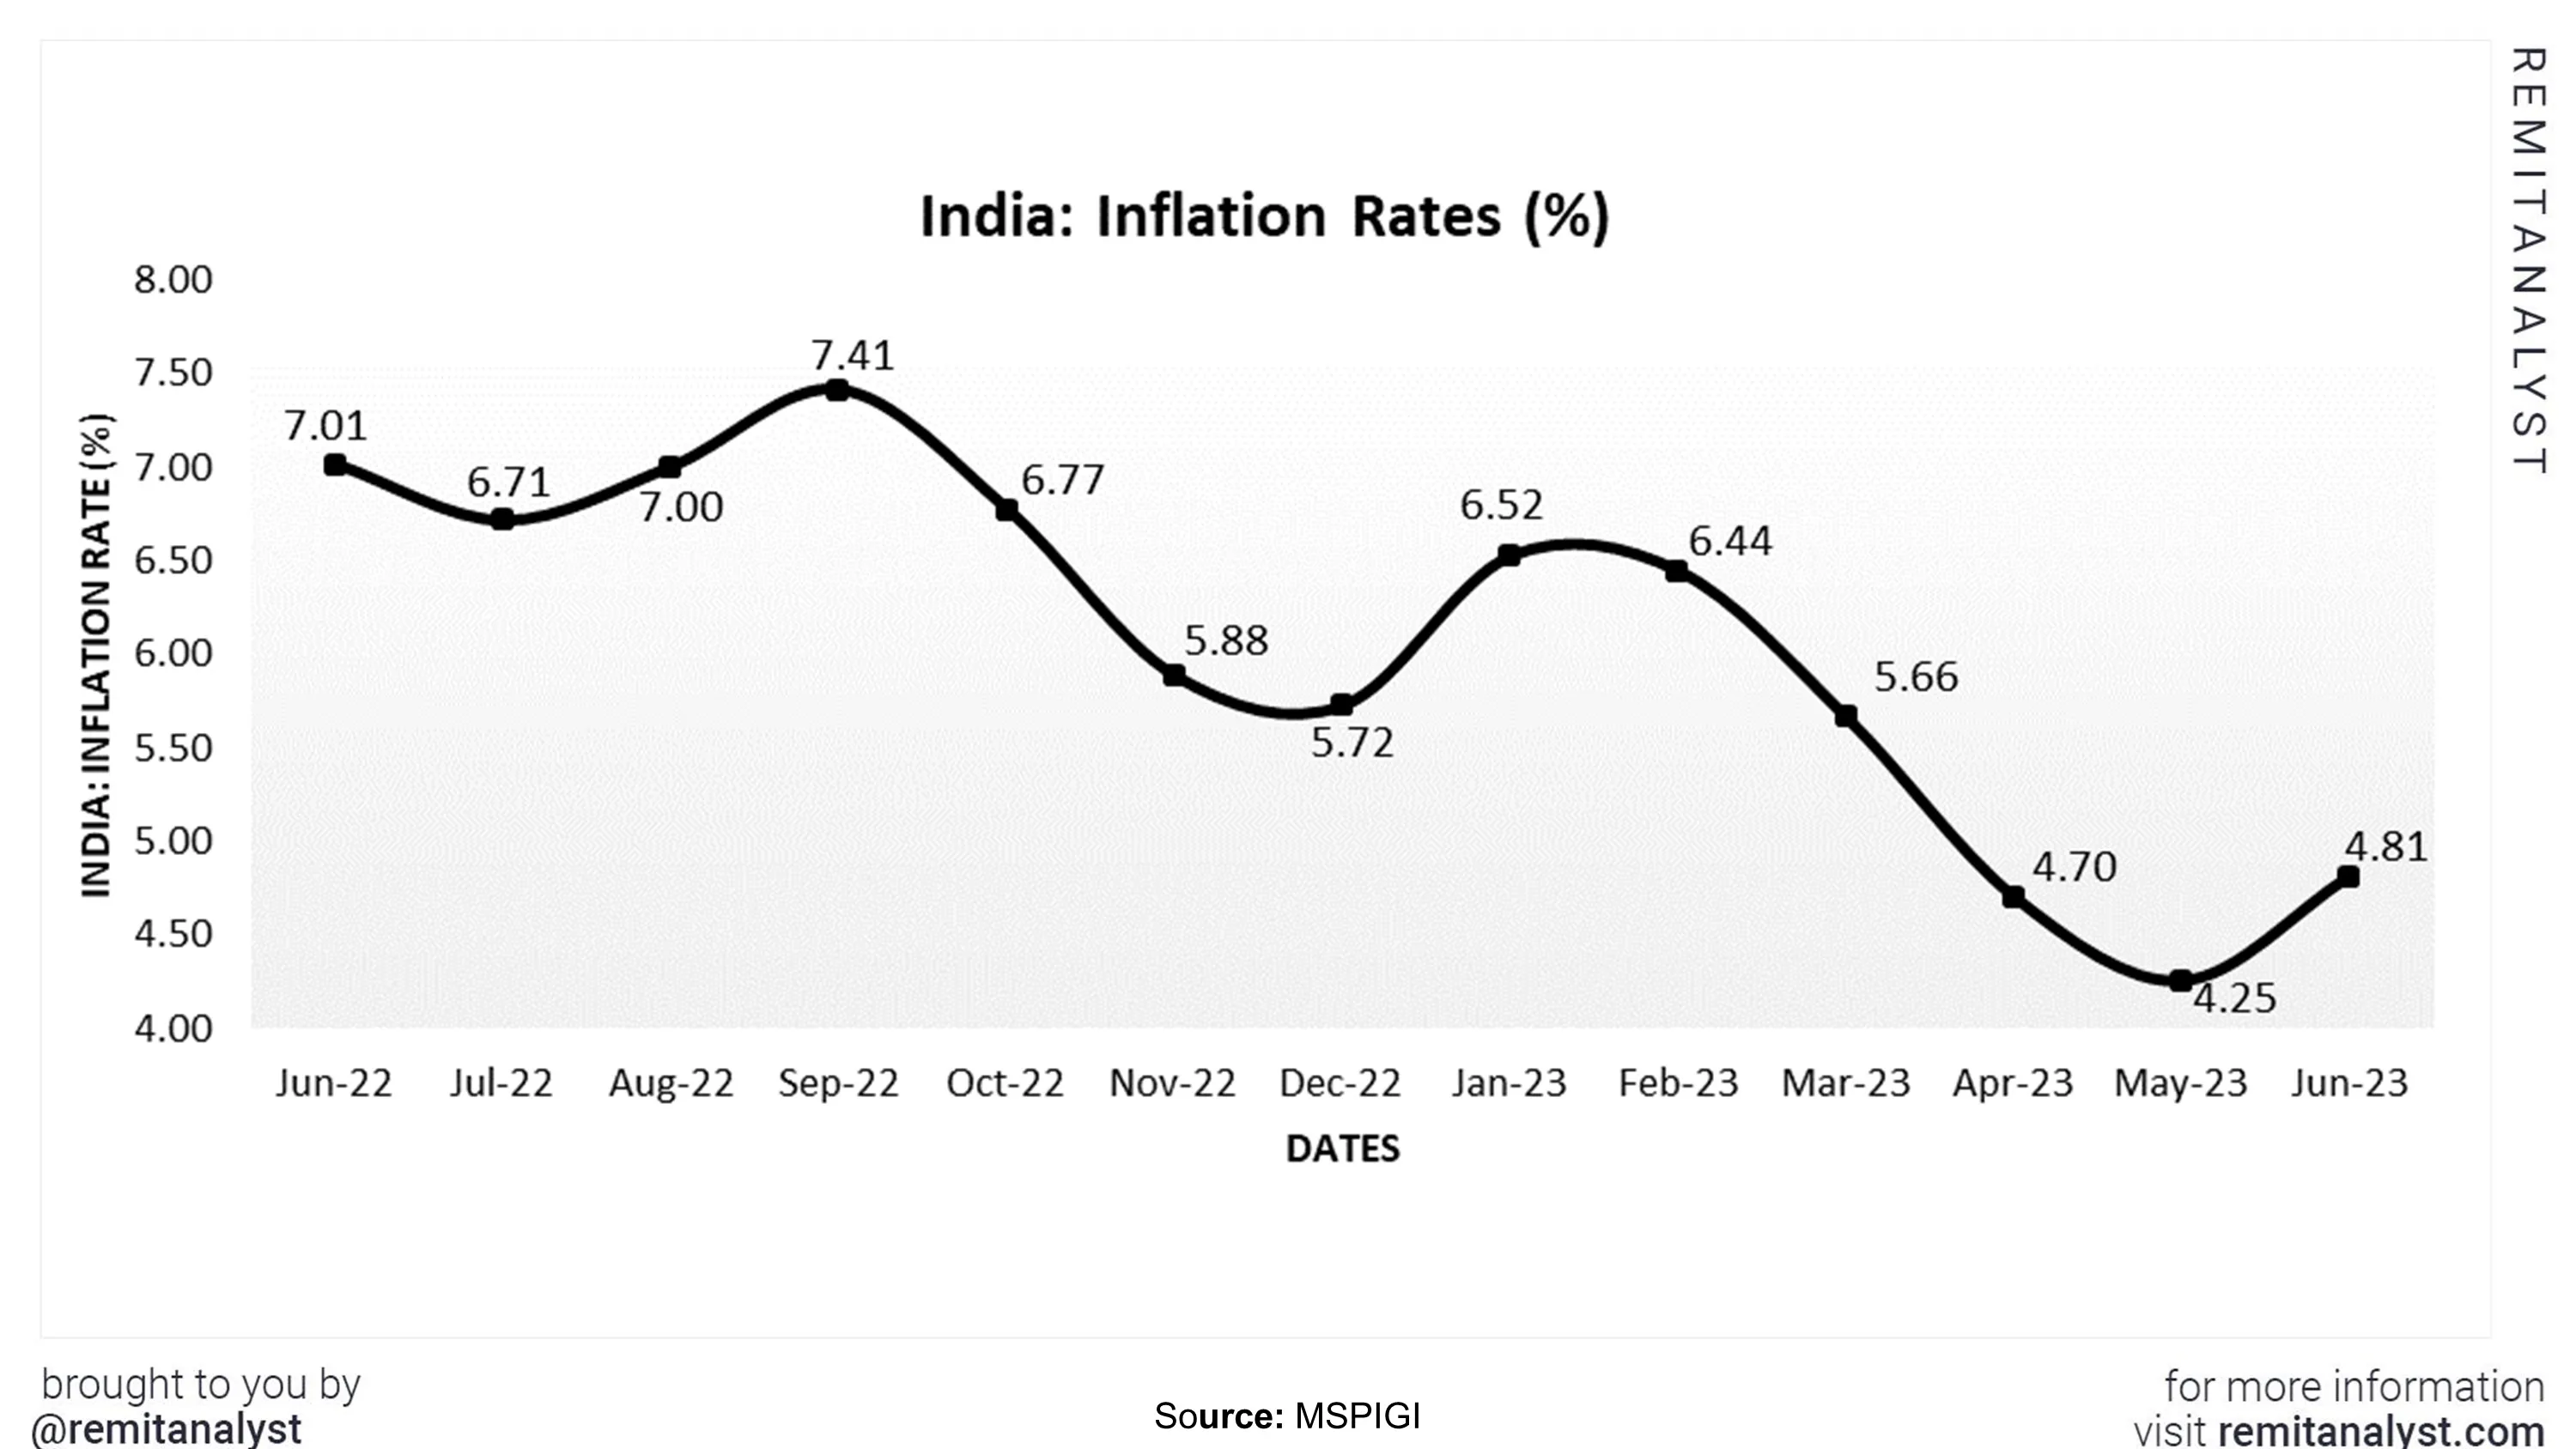 inflation-rates-in-india-from-jun-2022-to-jun-2023